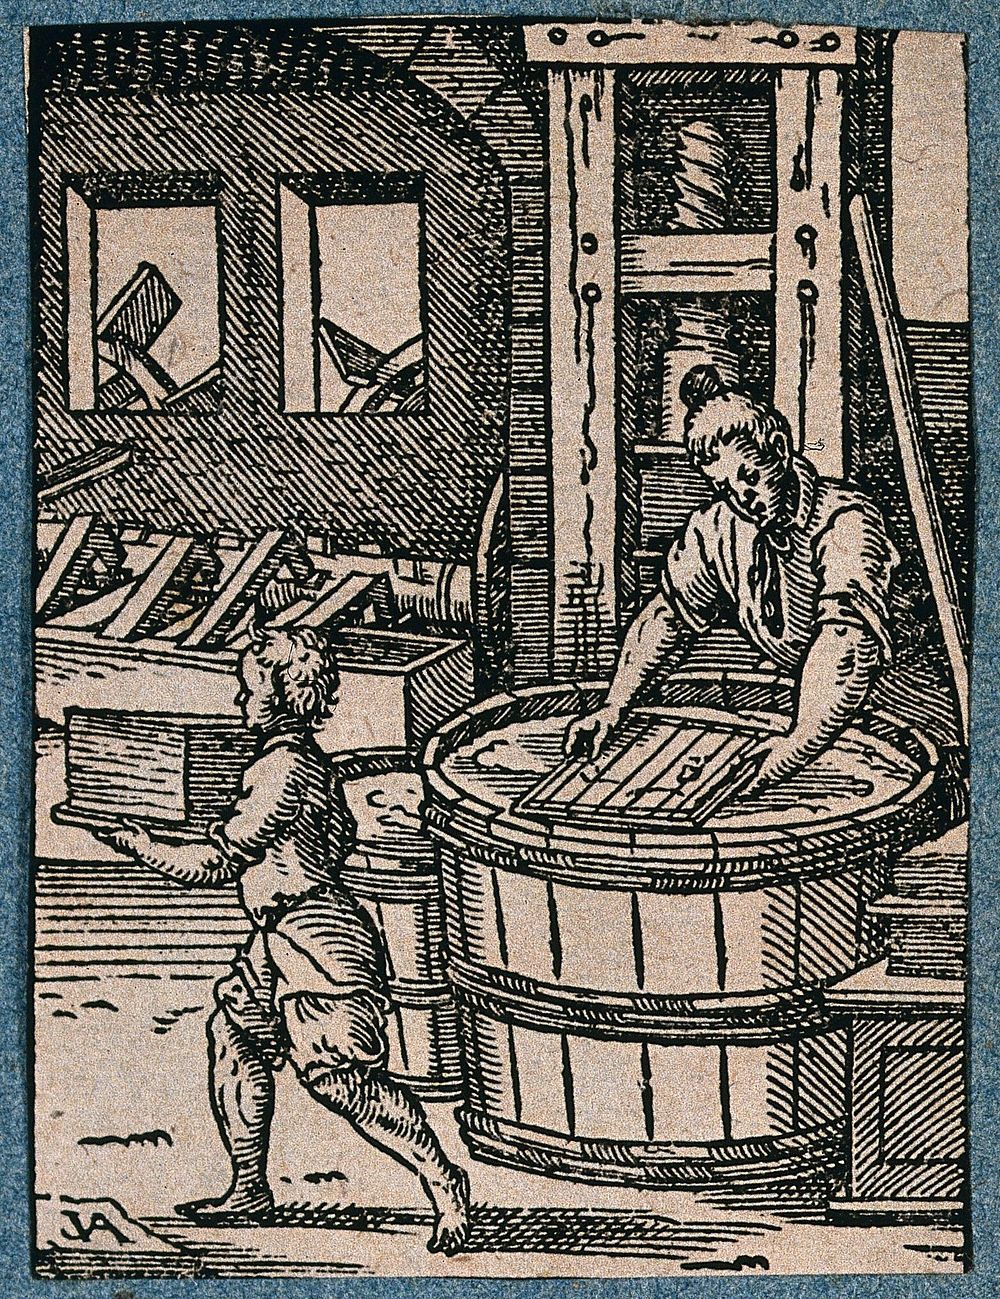 A man making paper; his apprentice carrying away the finished sheets. Woodcut by J. Amman.